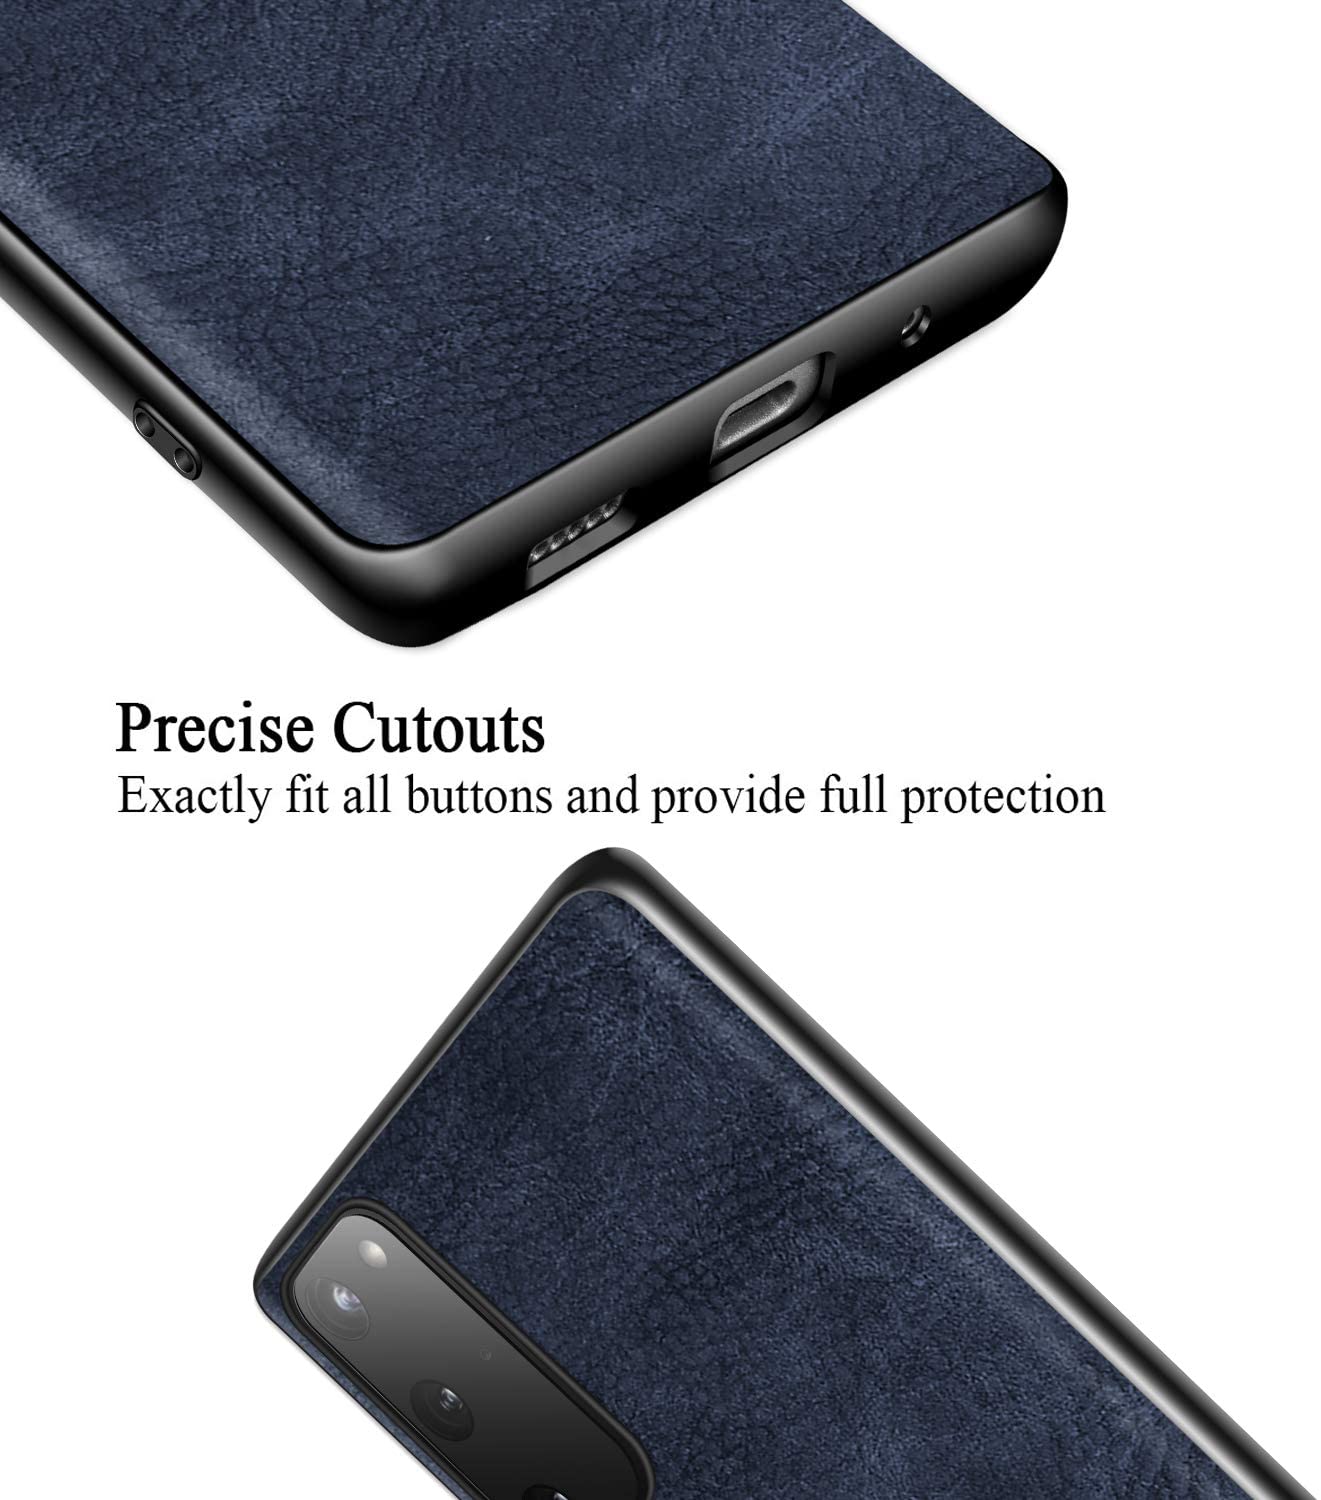 Samsung Galaxy S20 FE 360 degree protection leather back case cover by excelsior